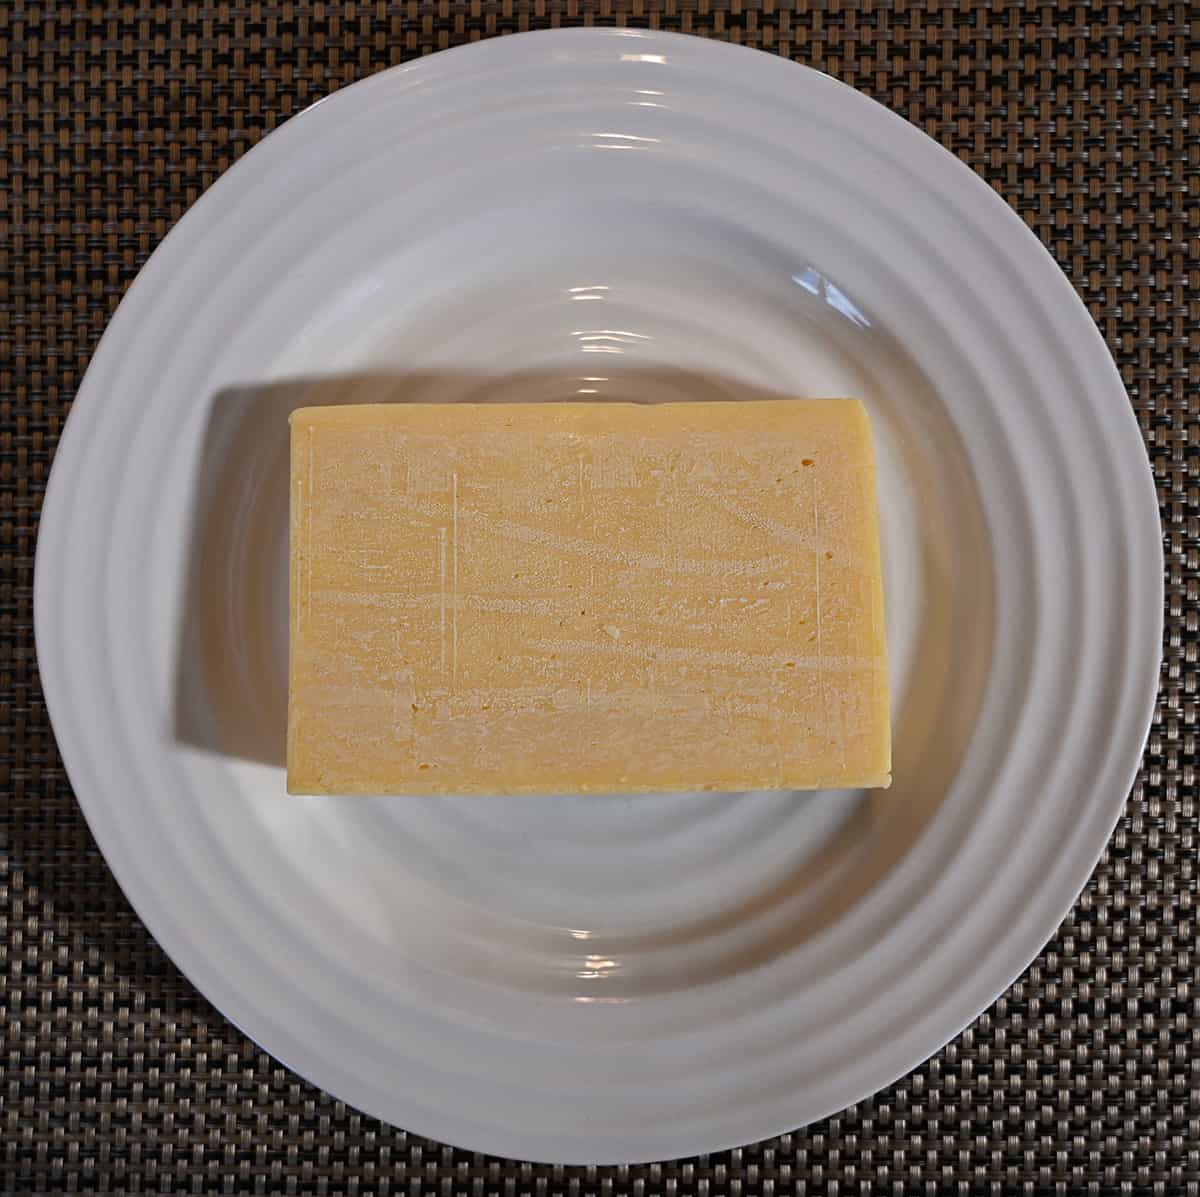 Top down image of the entire block of cheese unwrapped and on a white plate.